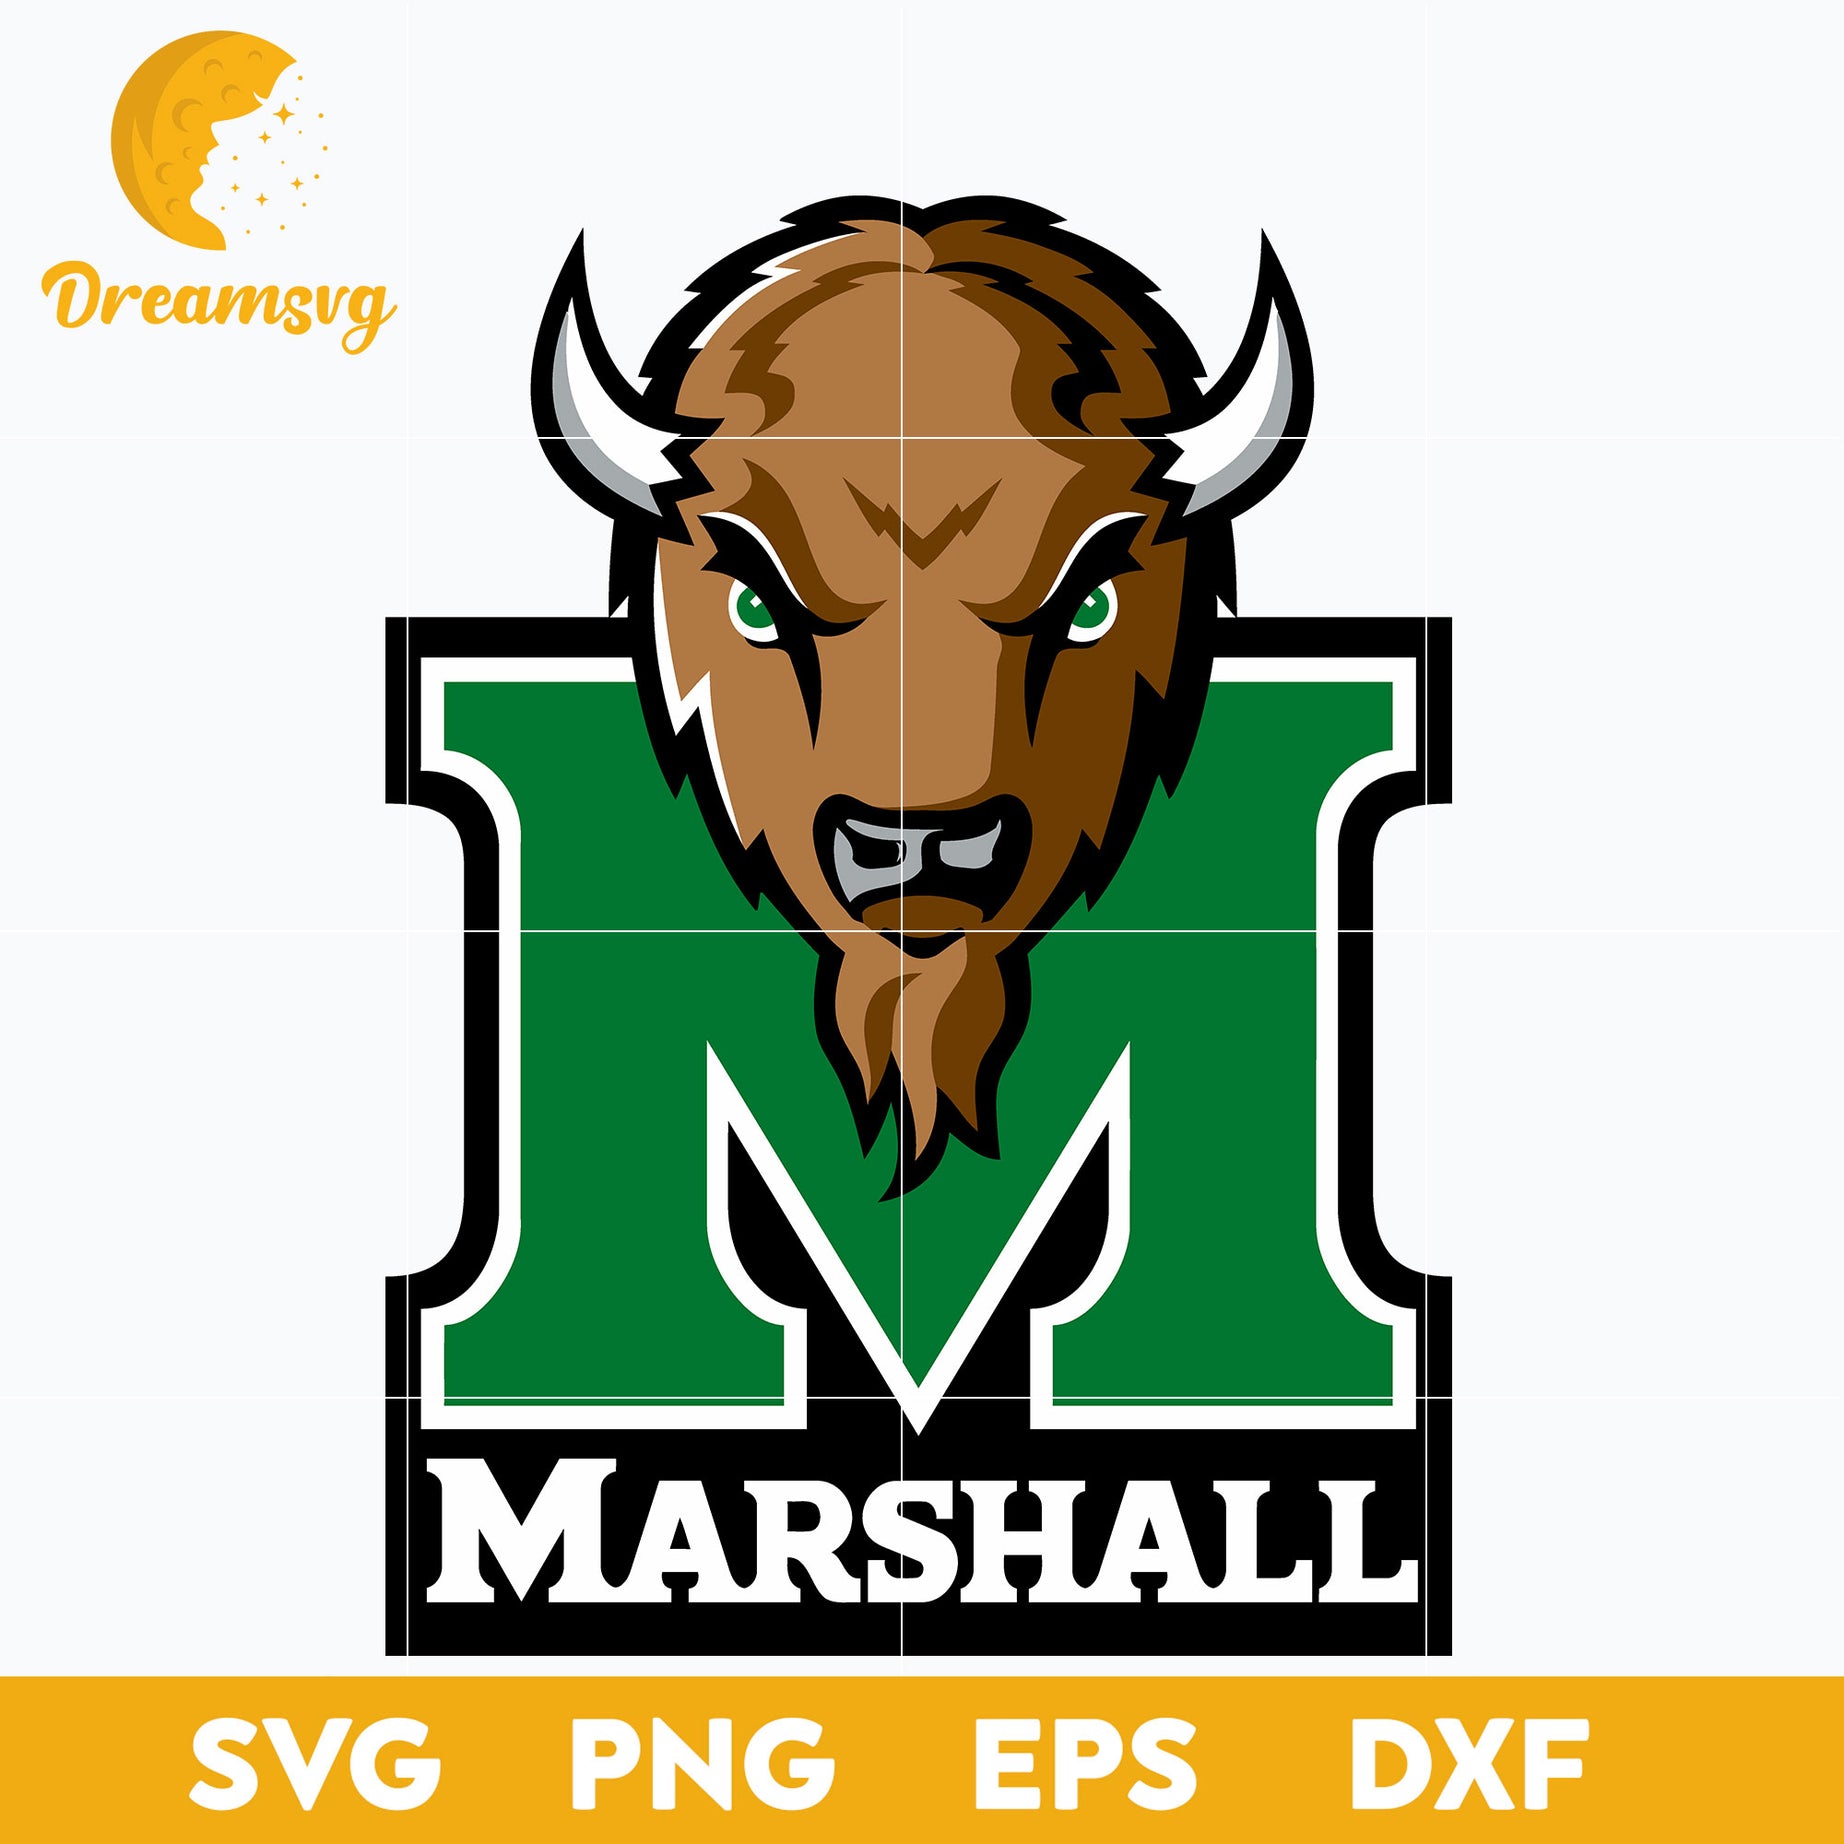 Marshall Thundering Herd Svg, Logo Ncaa Sport Svg, Ncaa Svg, Png, Dxf, Eps Download File.